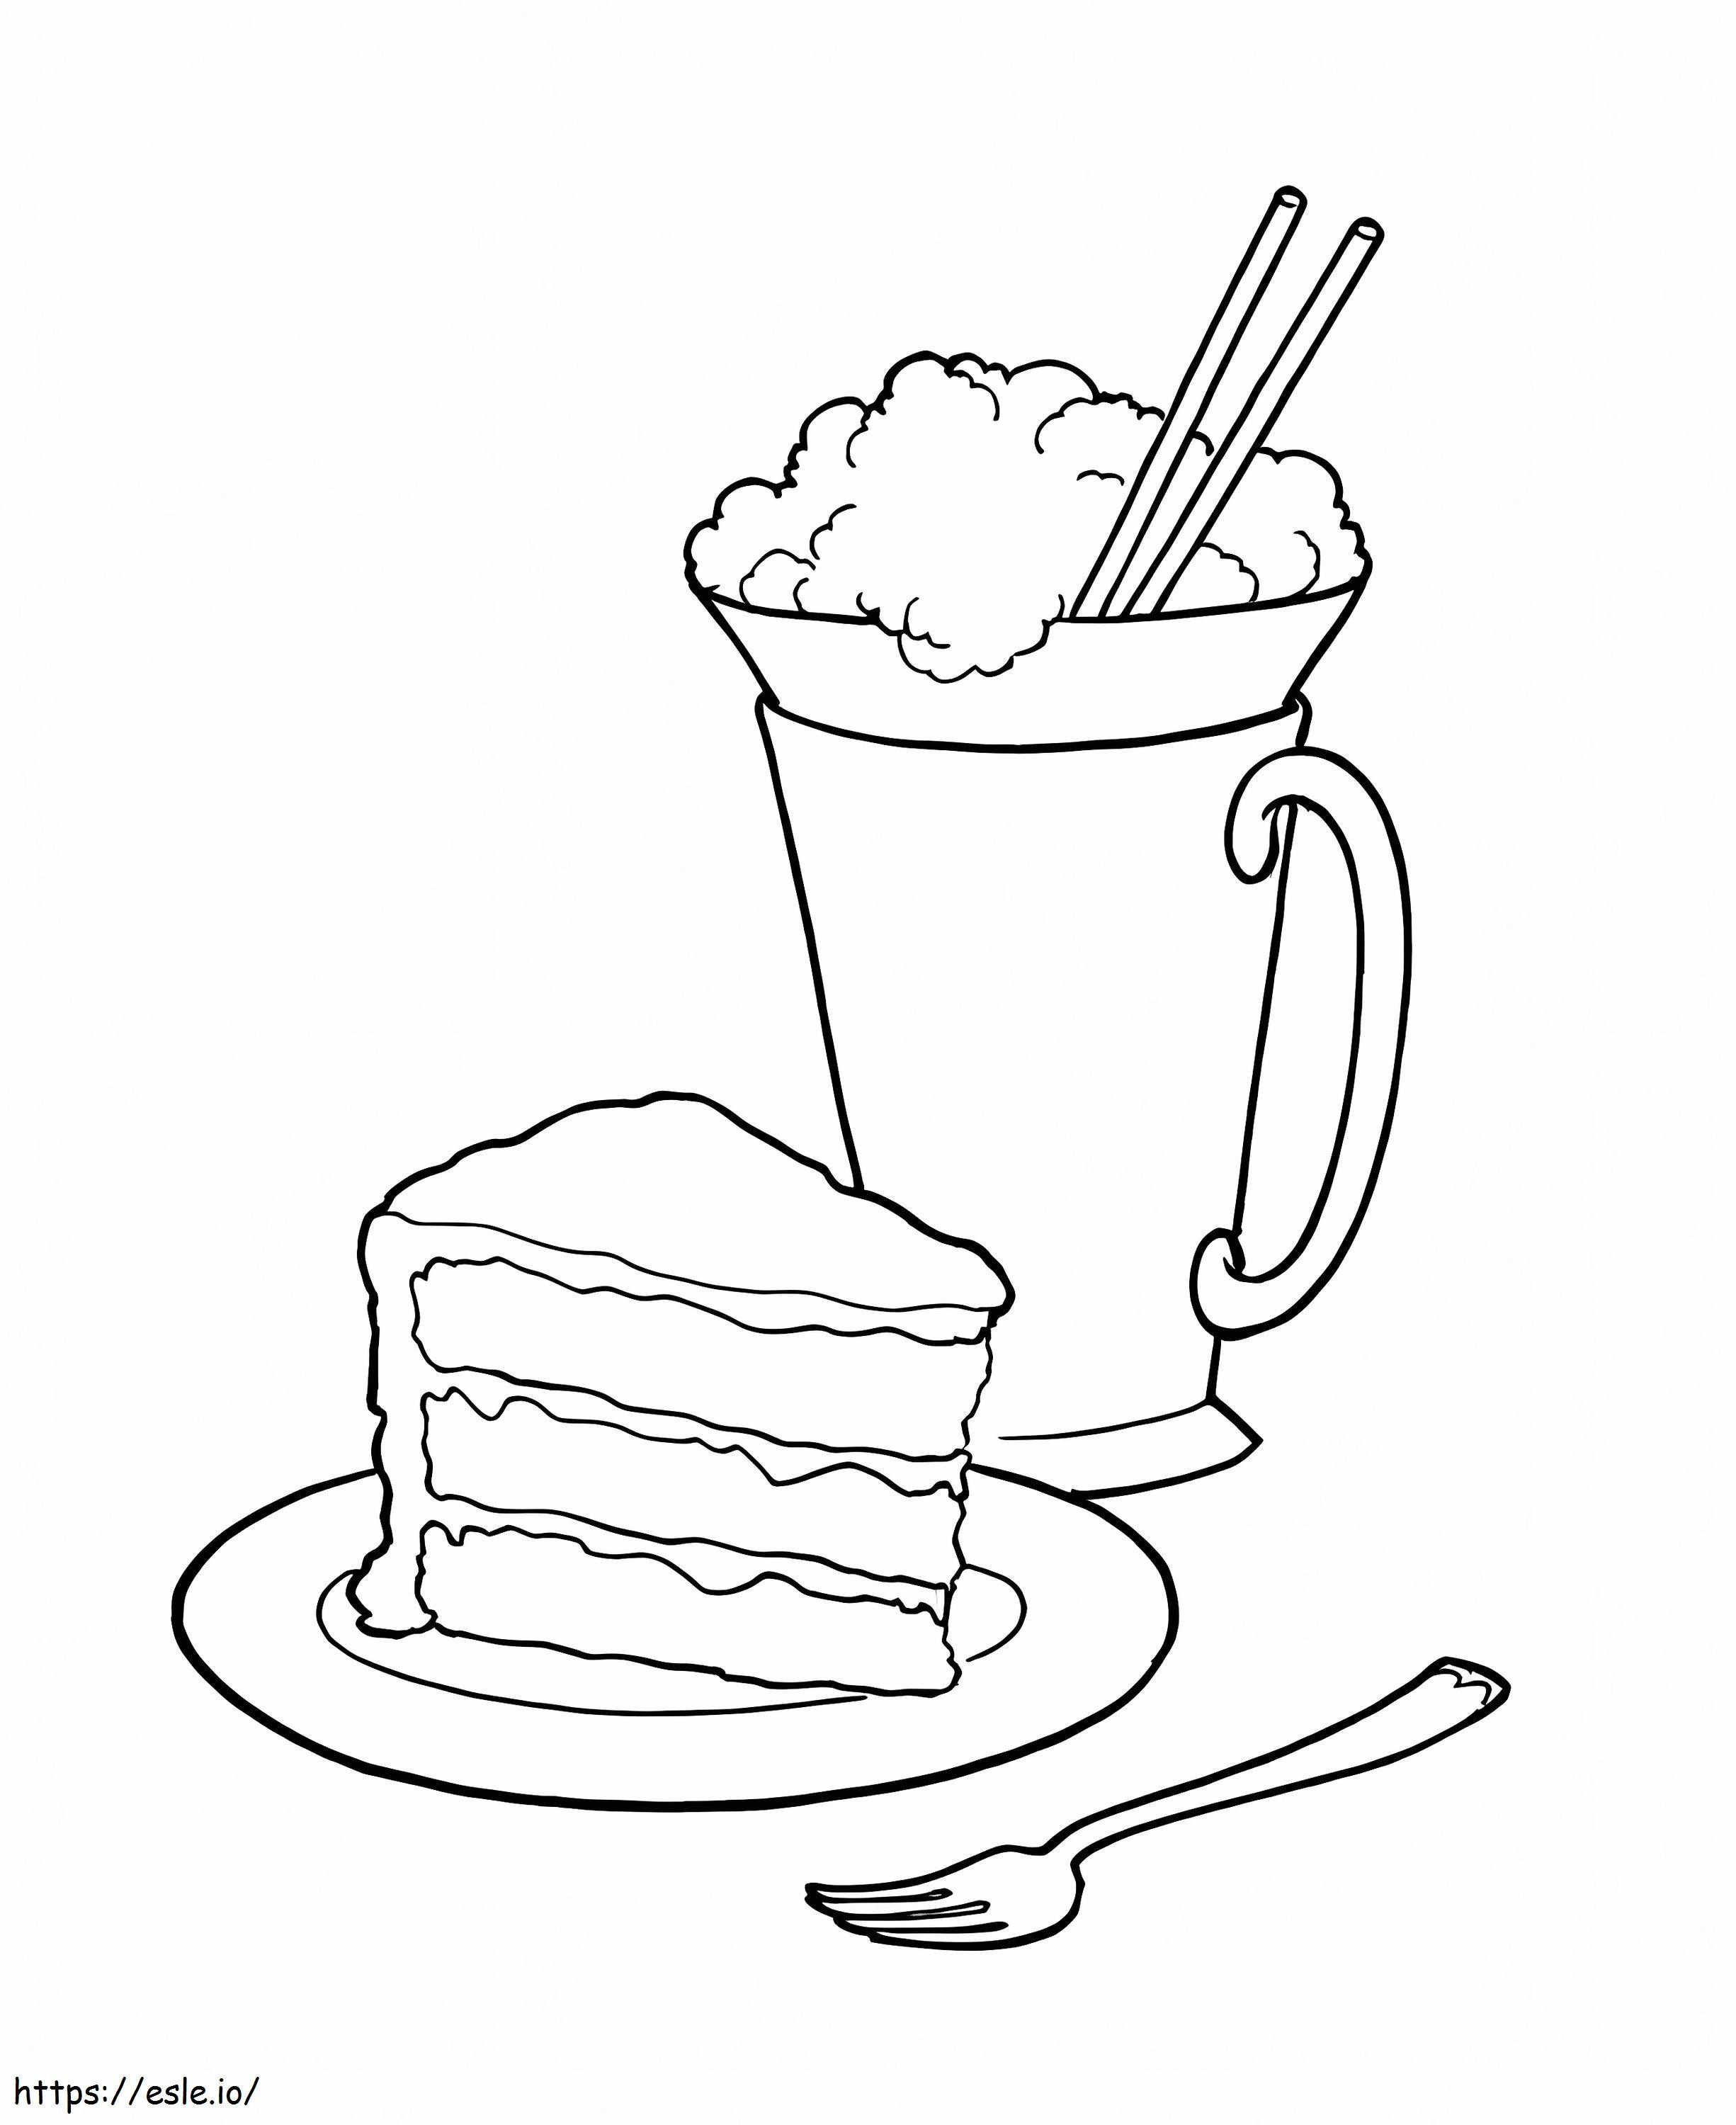 Simple Dessert coloring page